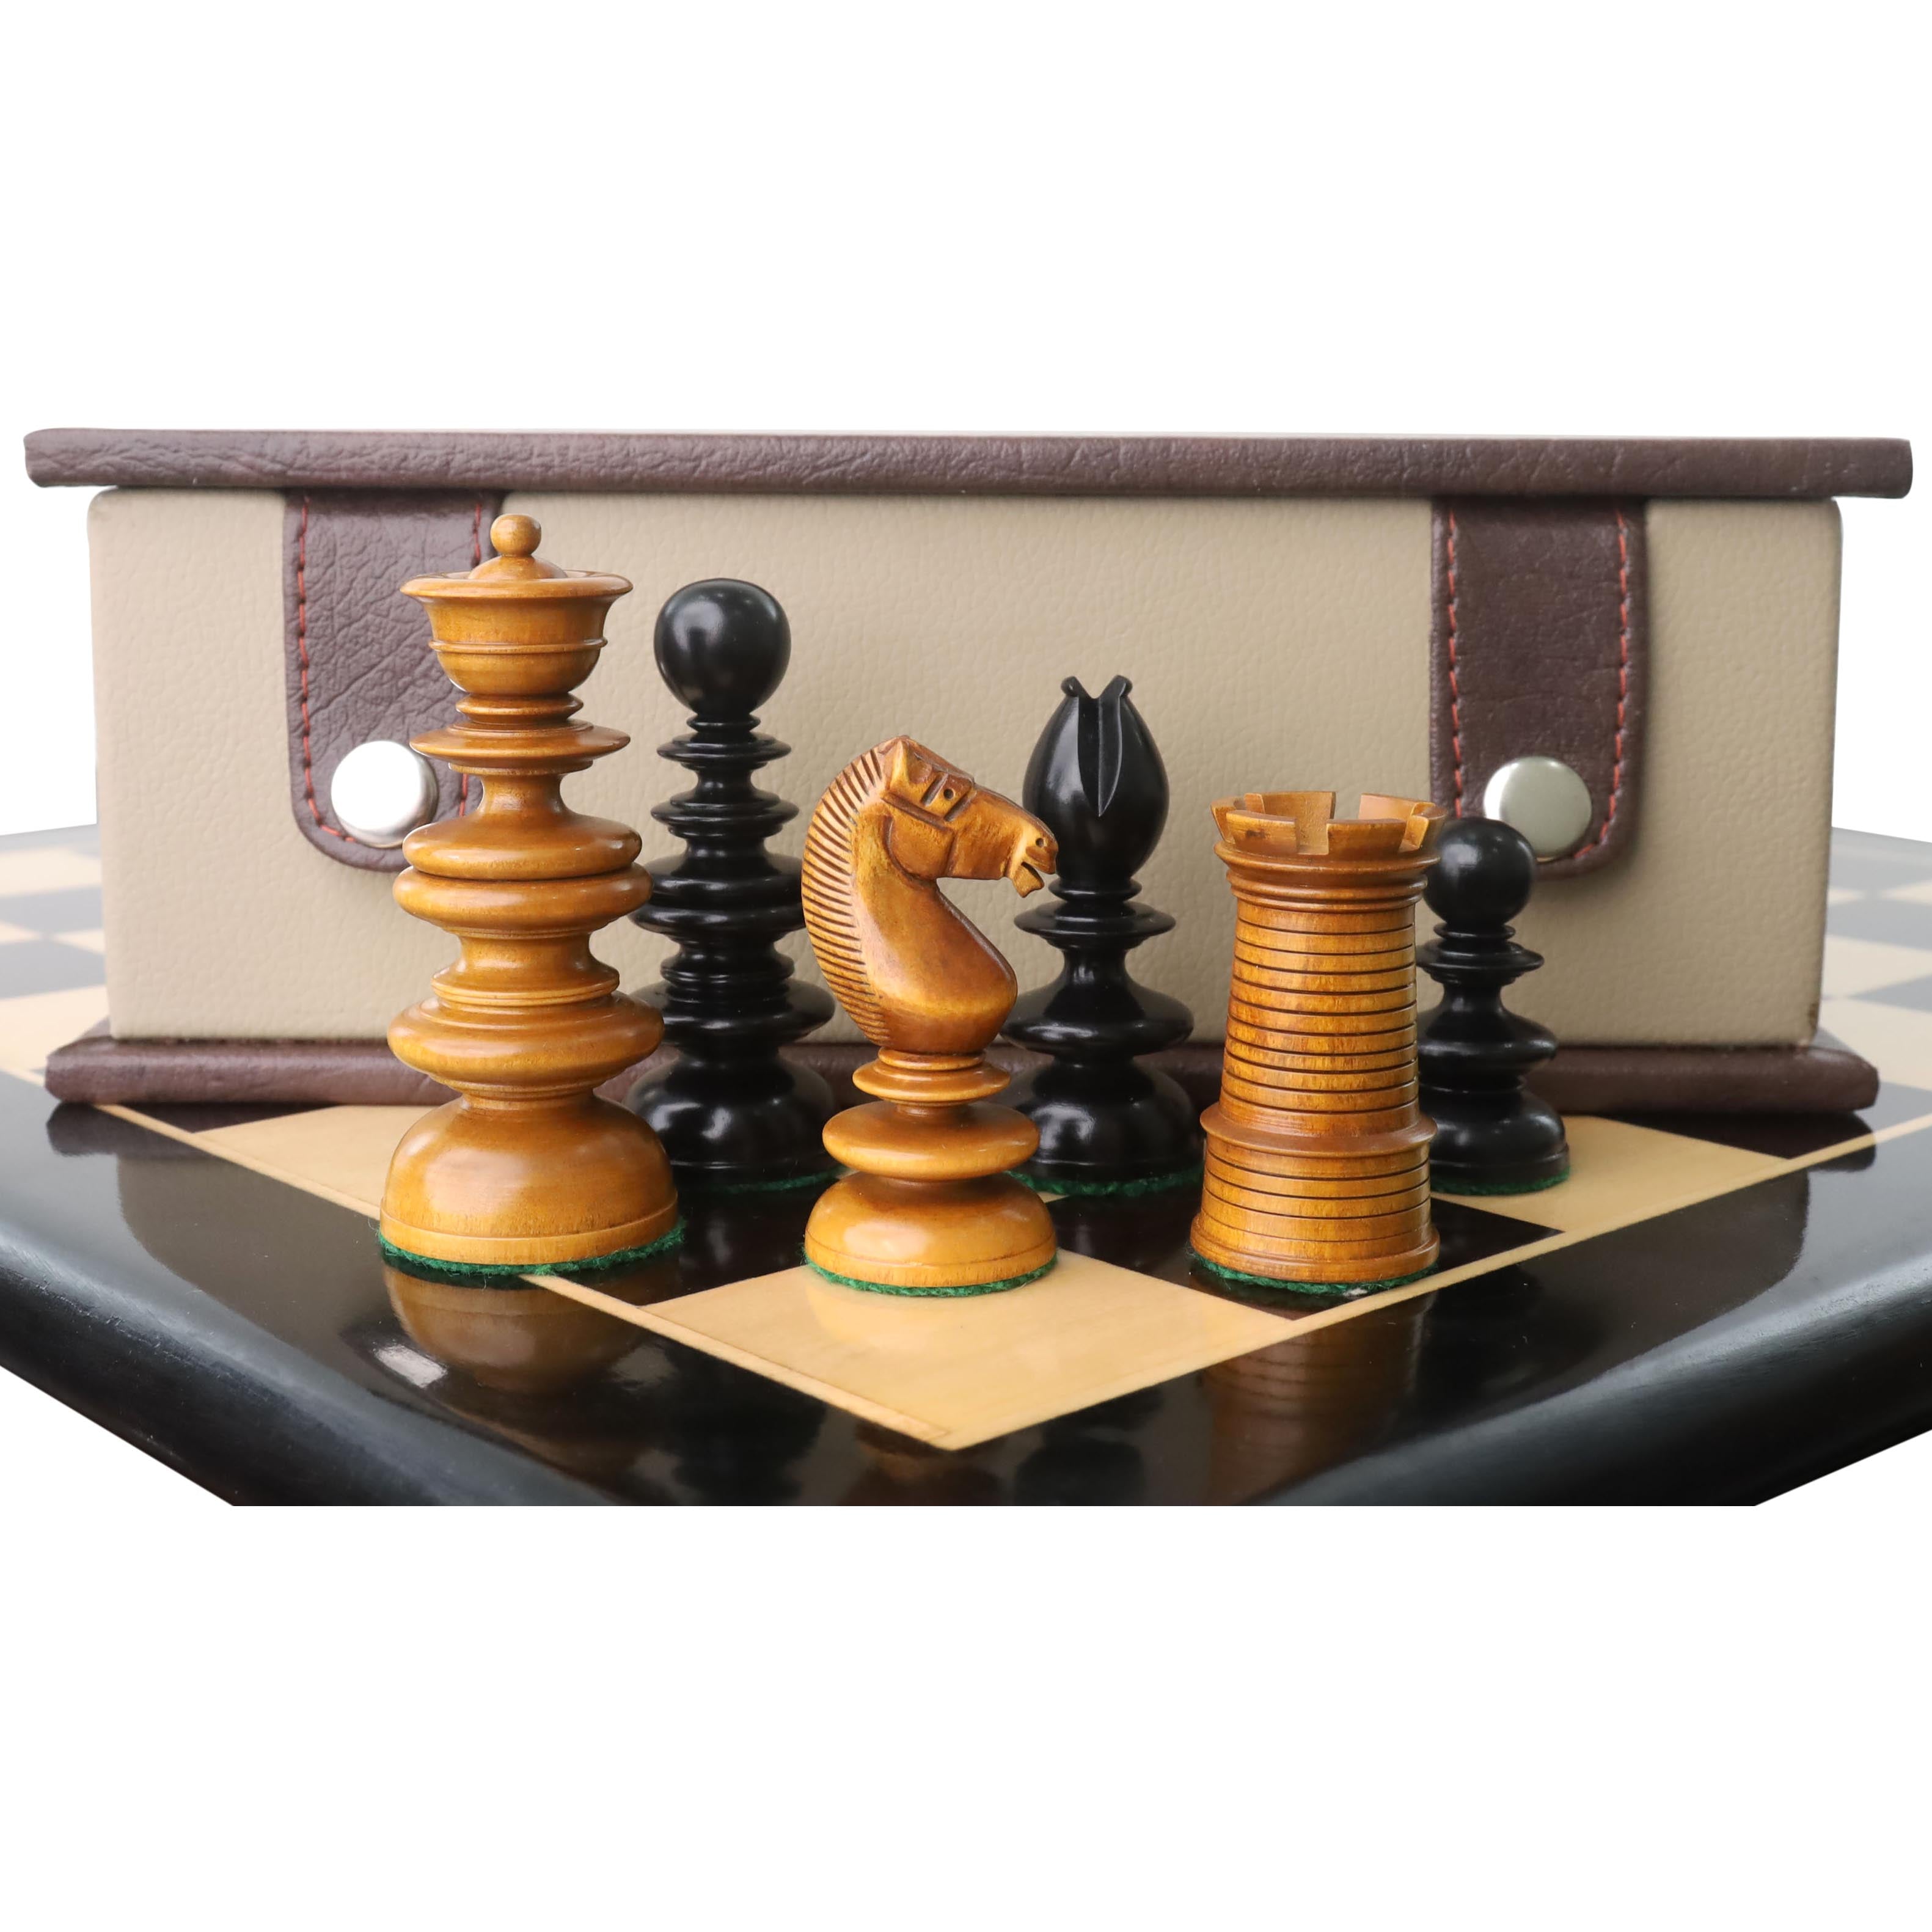 Combo of 3.3" St. John Pre-Staunton Calvert Chess set - Pieces in Ebony Wood with 19 inches Chess Board and Storage Box